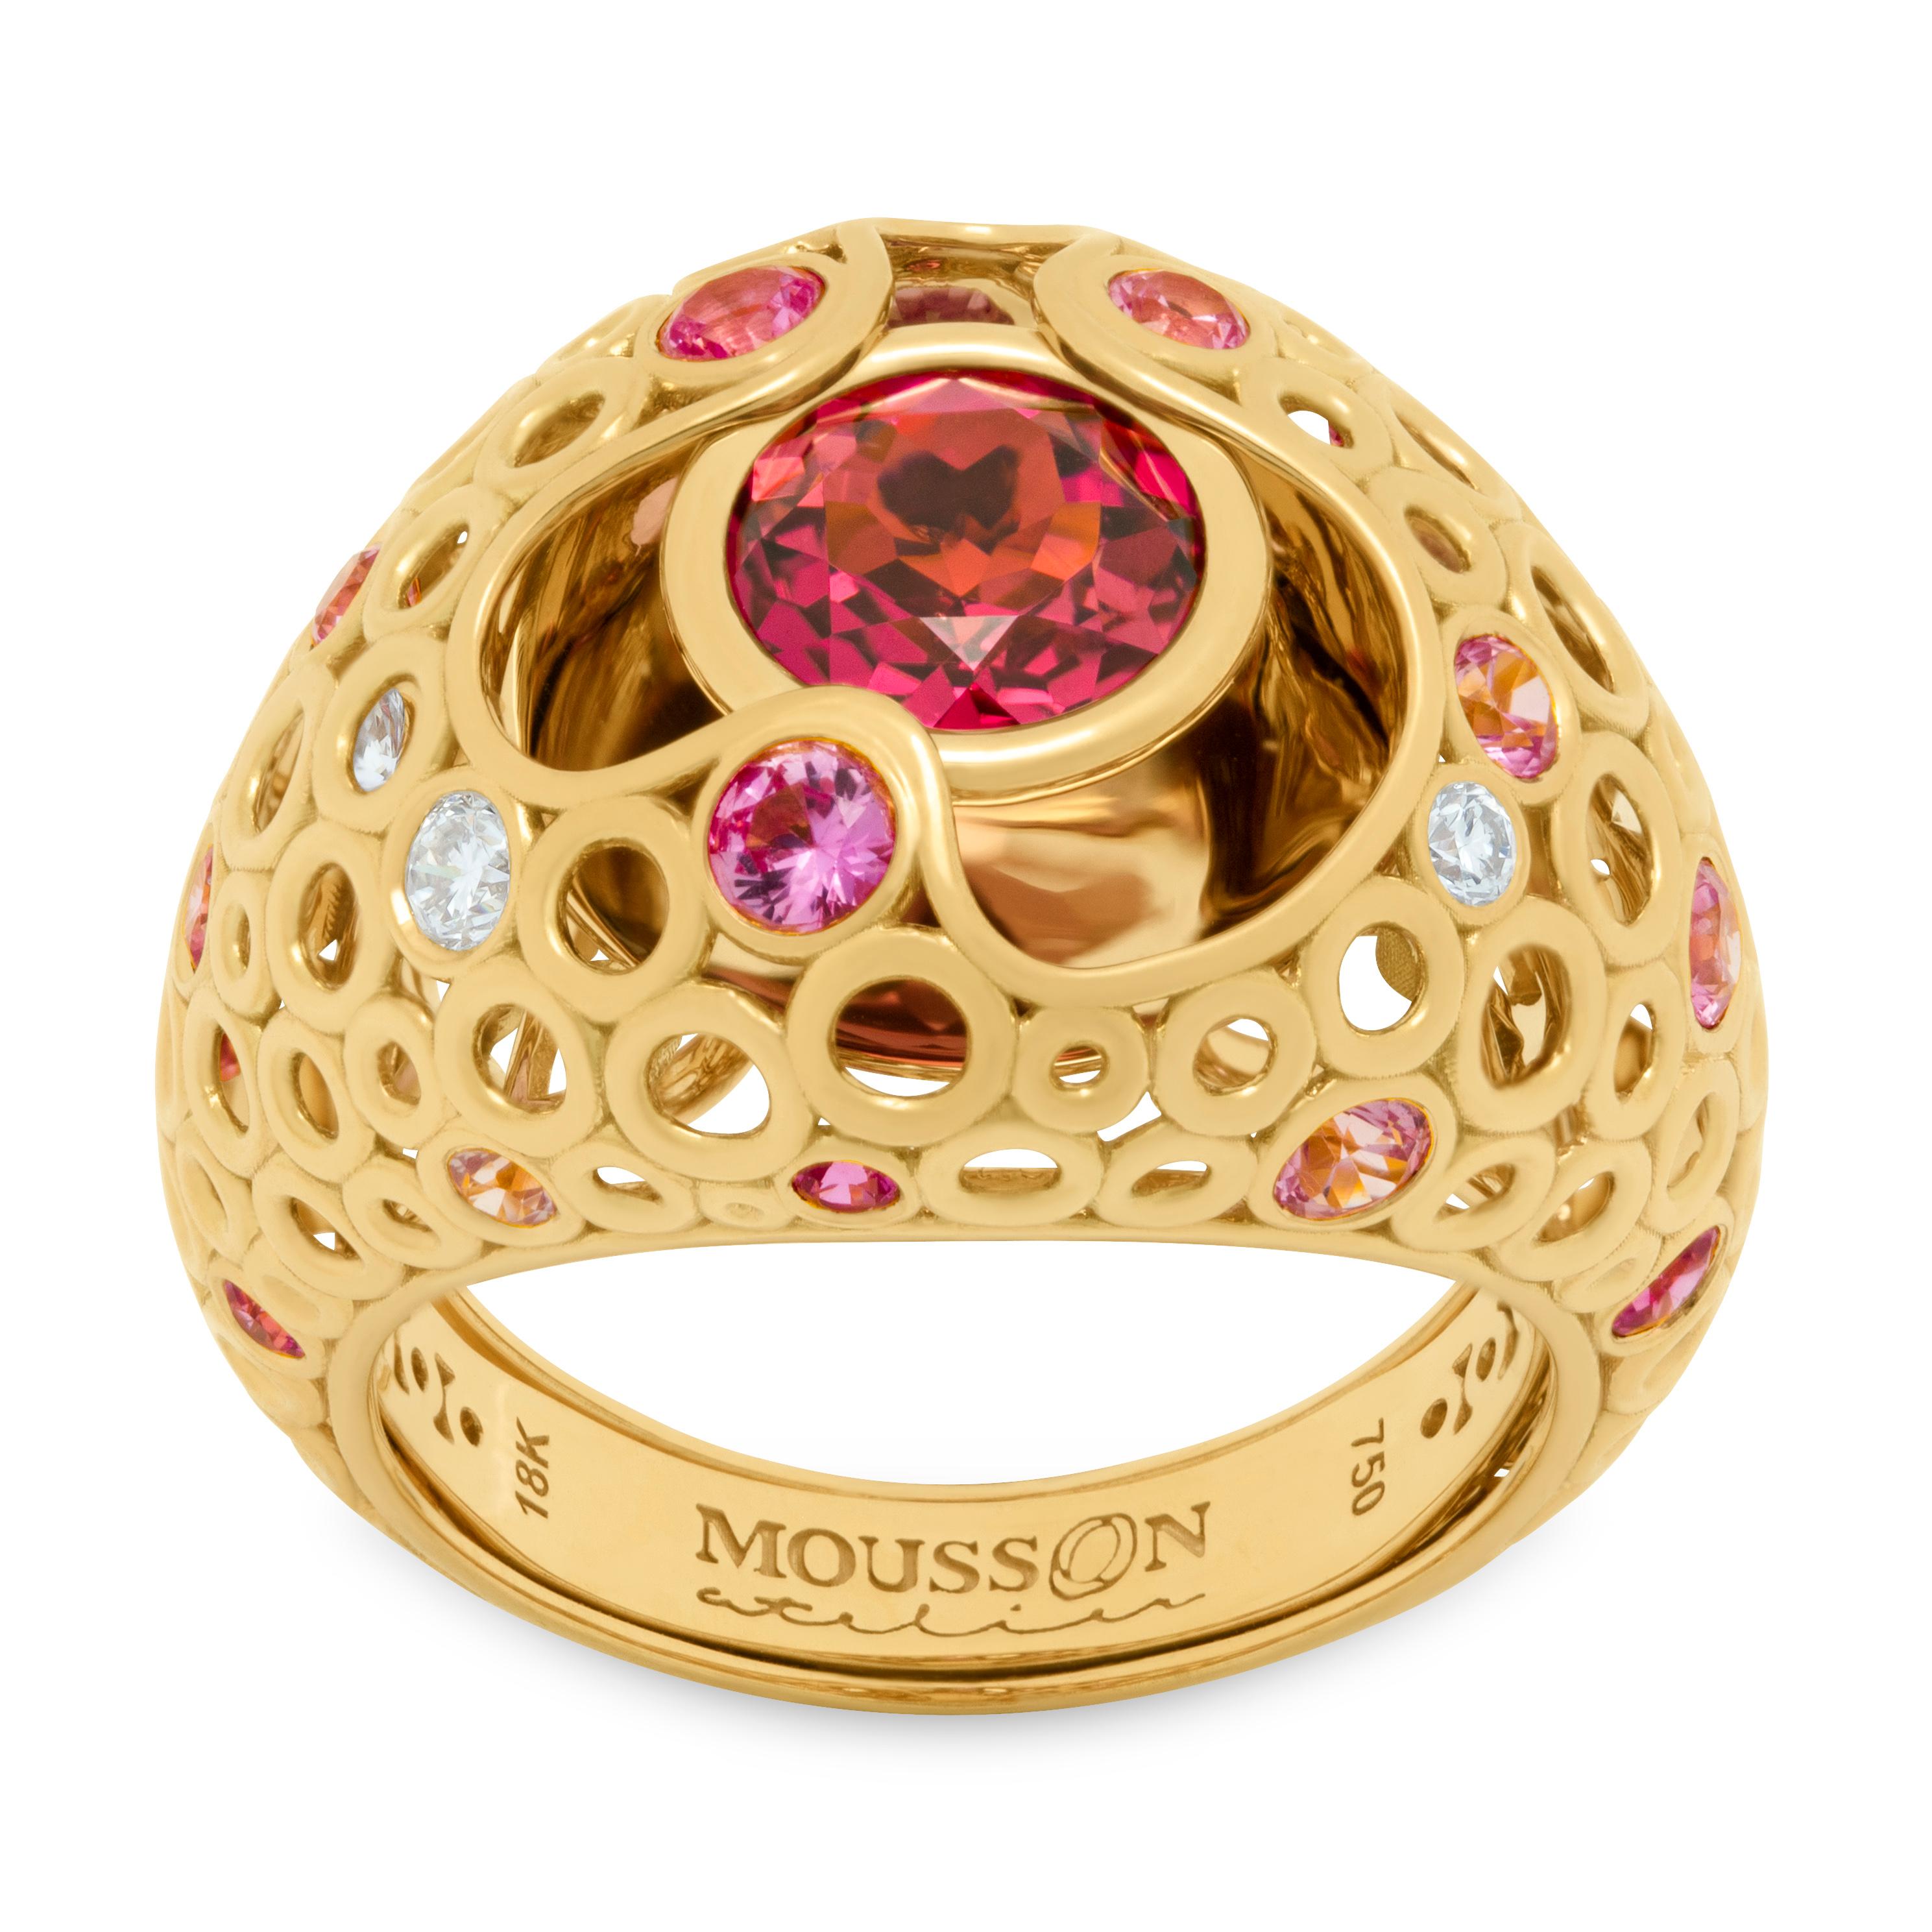 Pink Tourmaline 1.58 Carat Sapphires Diamonds 18 Karat Yellow Gold Bubble Ring
Incredibly light and airy Ring from our Bubbles Collection. Yellow 18 Karat Gold is made in the form of variety of small bubbles, some of which have 18 Pink Sapphires and